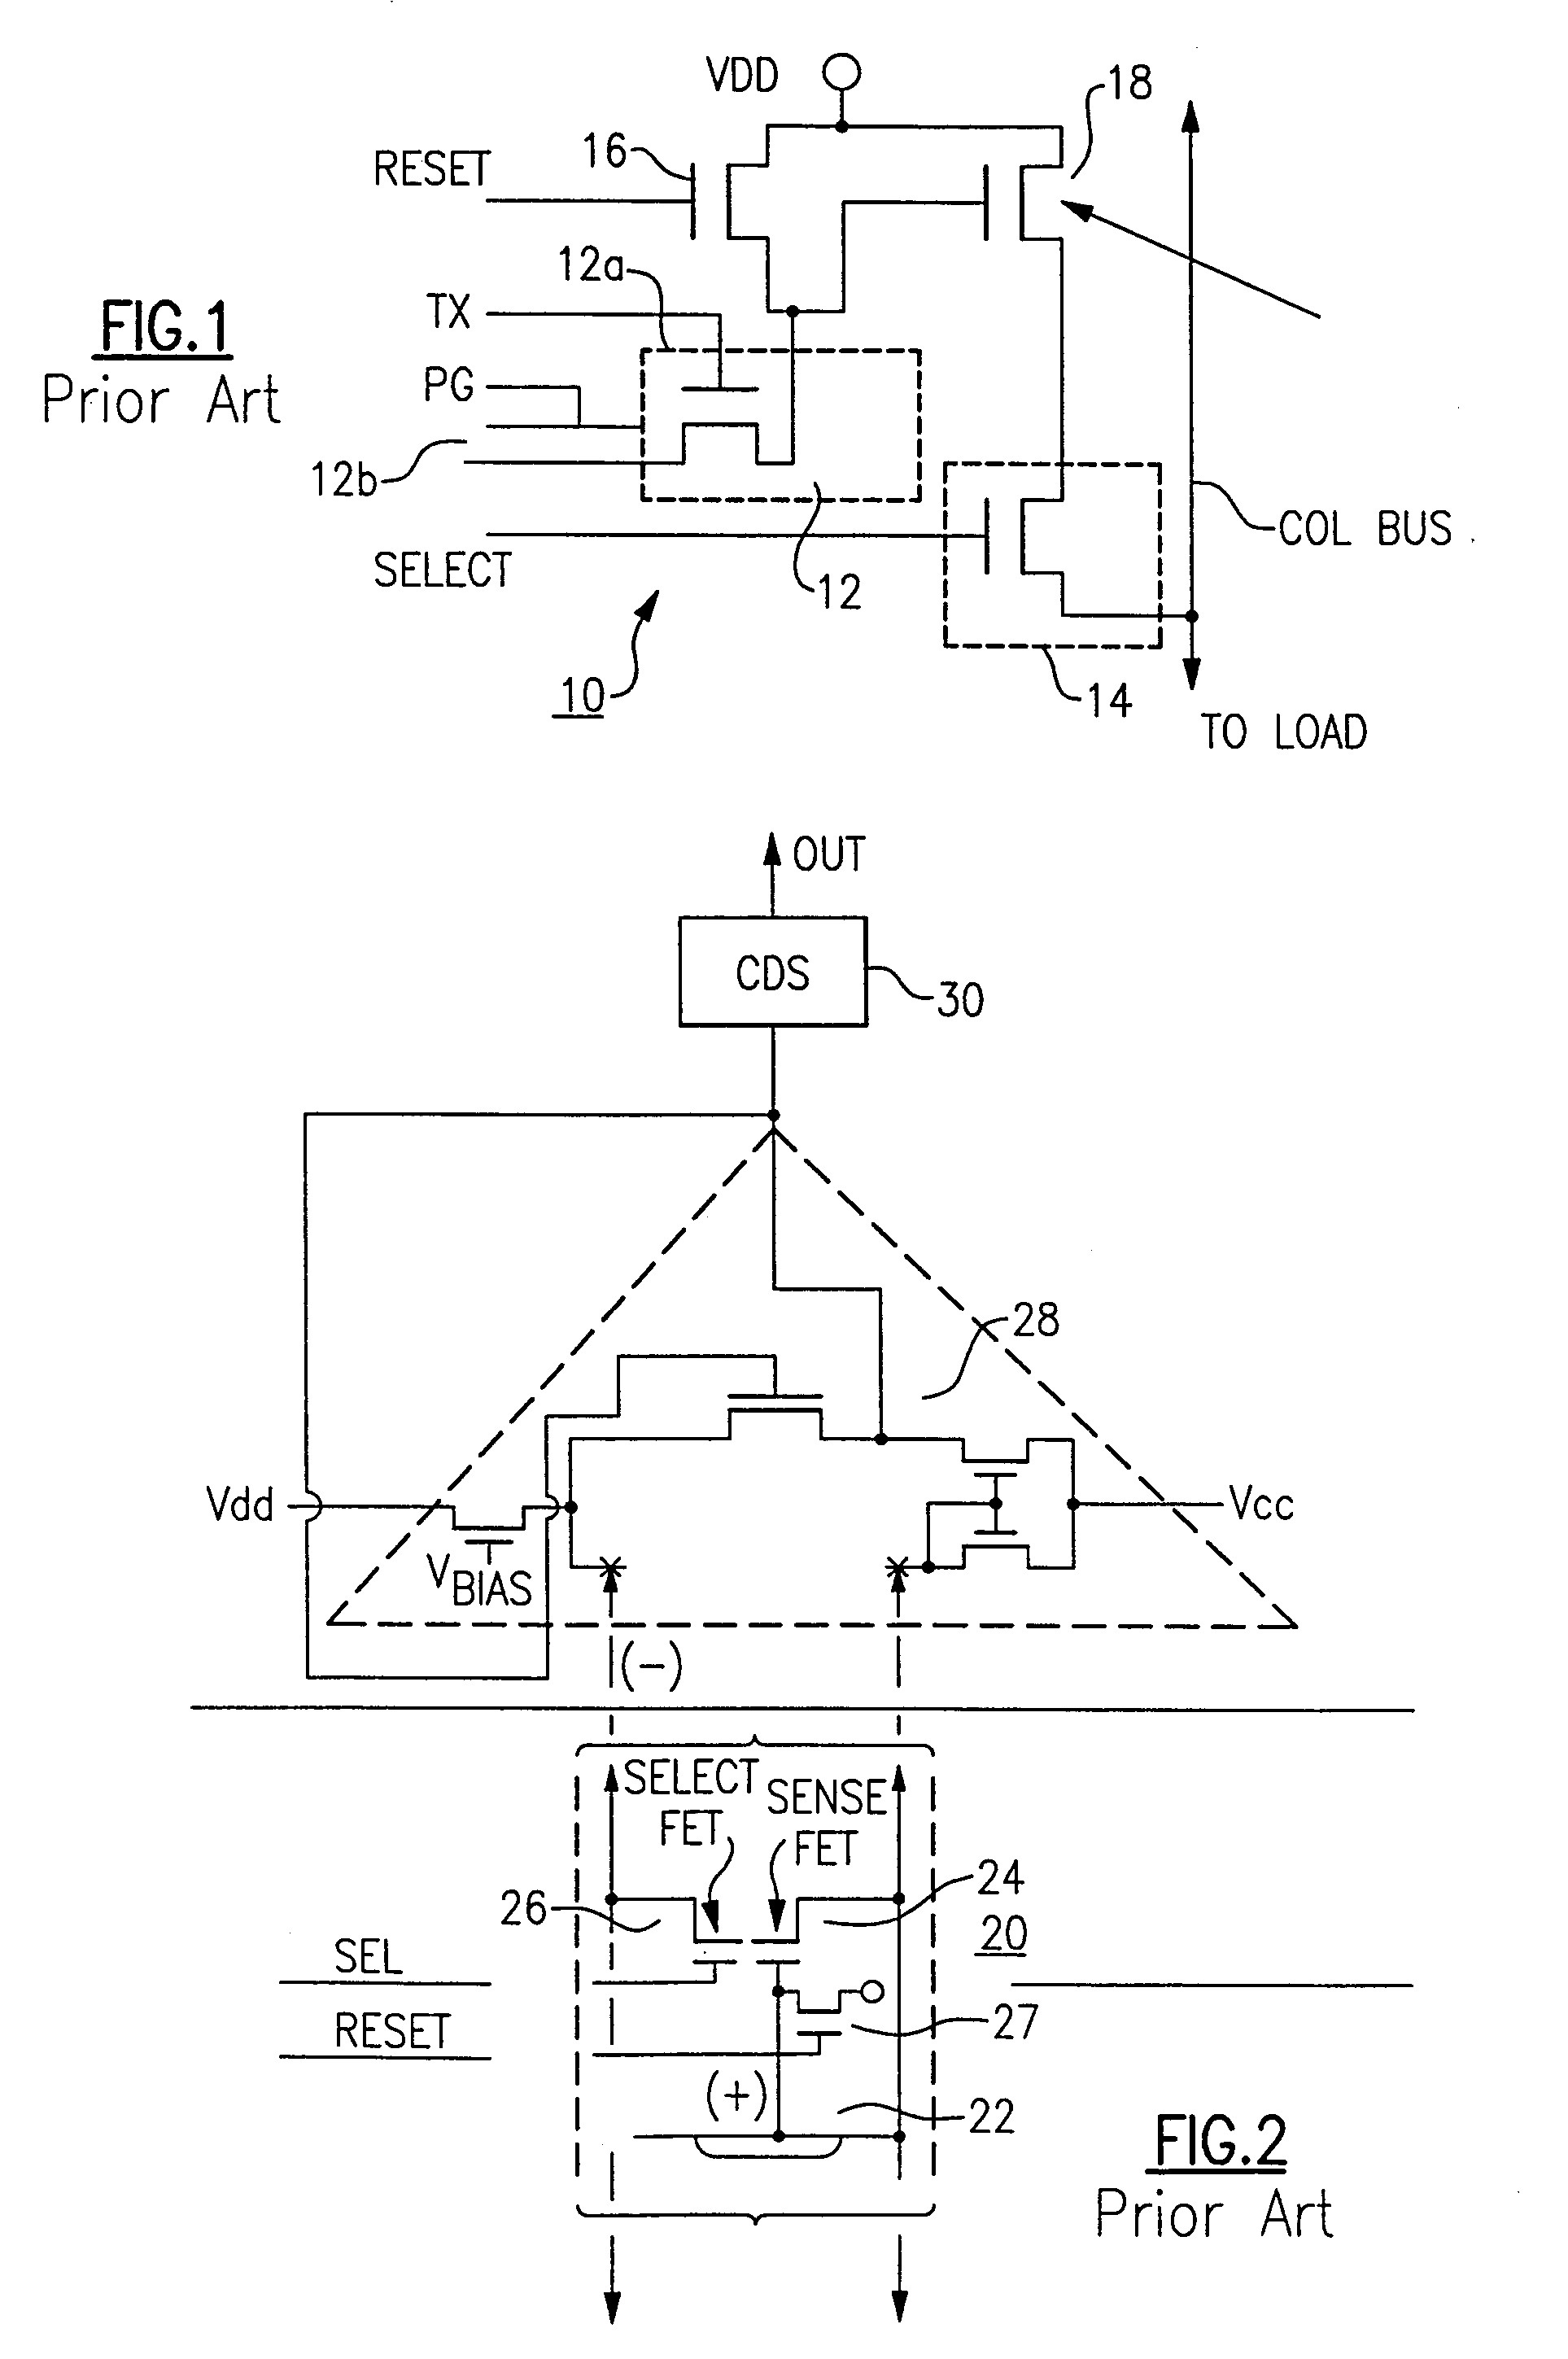 Solid state imager with reduced number of transistors per pixel